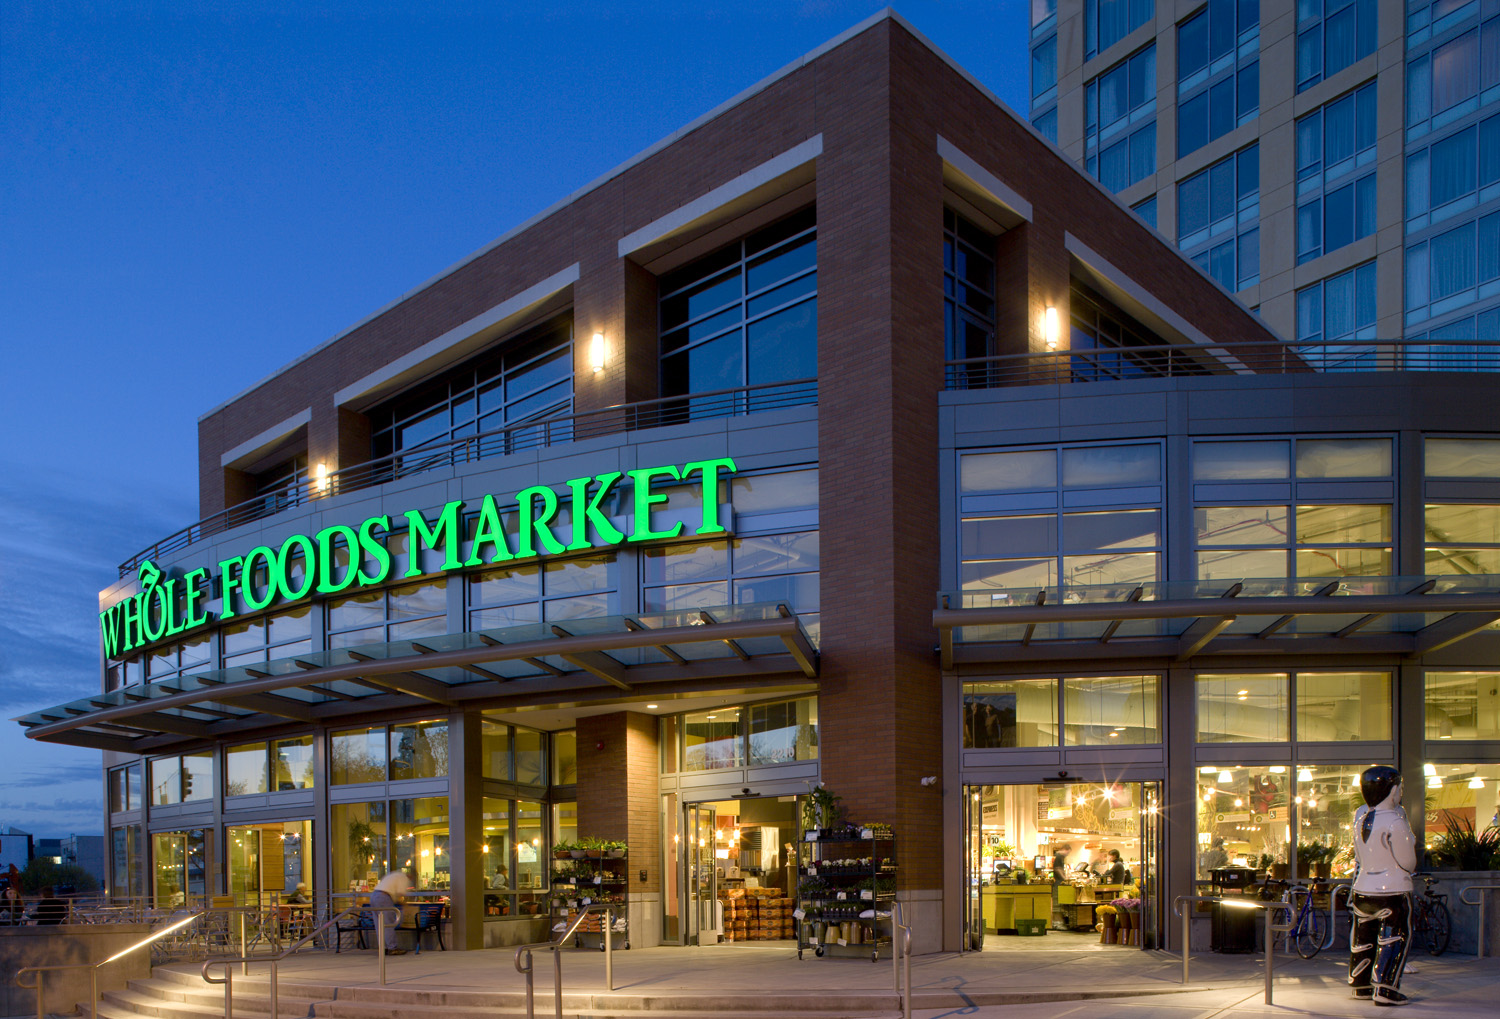 Whole Foods Market: Explore Job Opportunities Today!